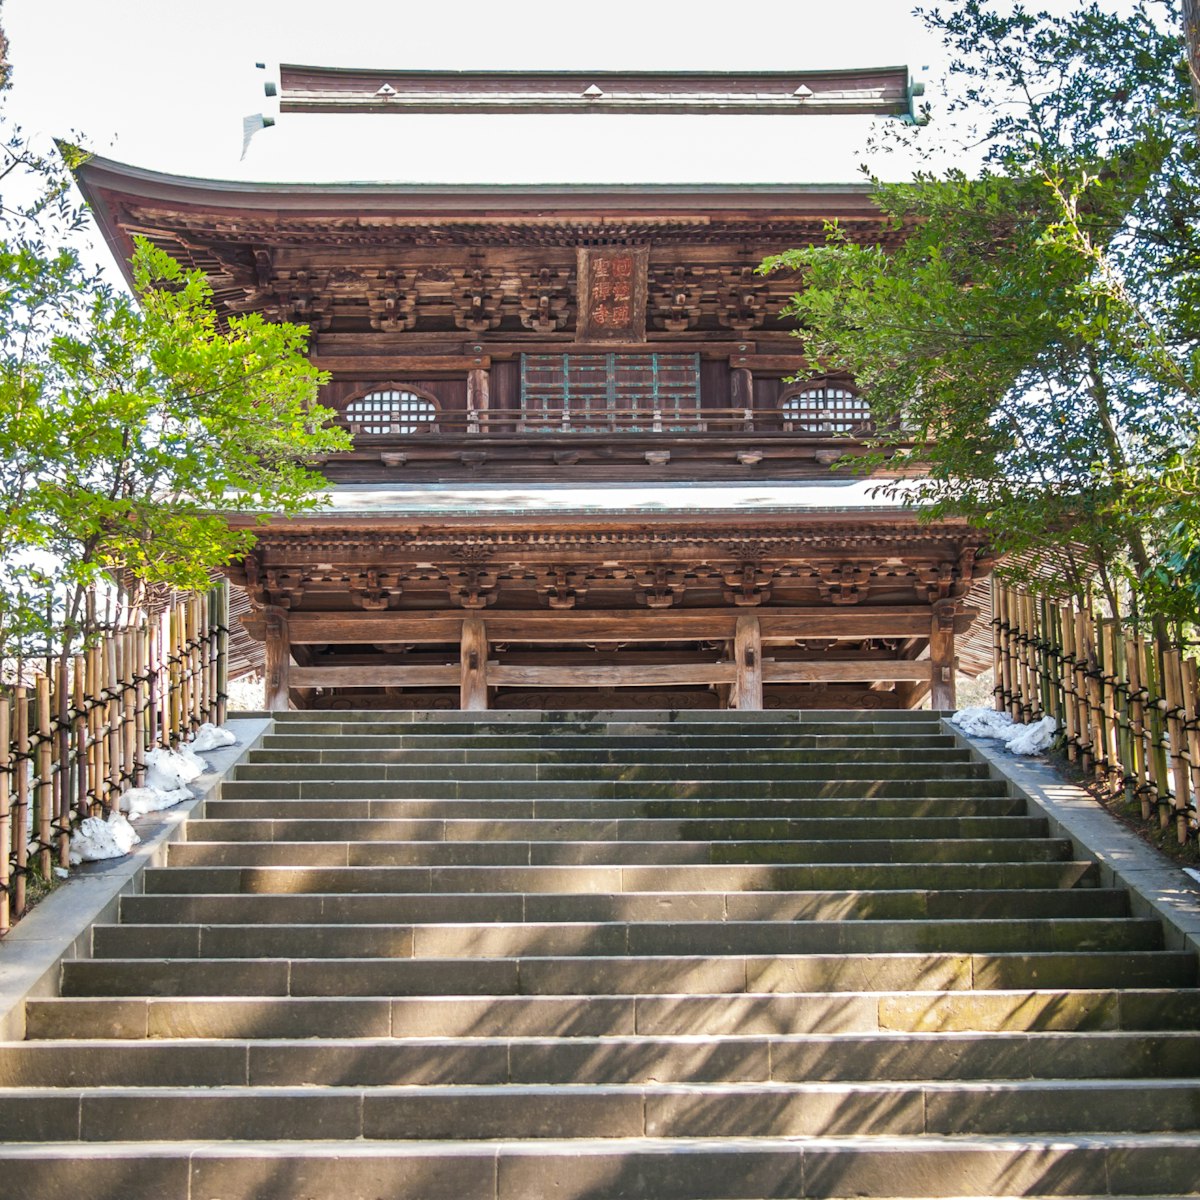 The incredible Engaku Ji entrance building build in wood in the city of Kamakura; Shutterstock ID 450122116; Your name (First / Last): Laura Crawford; GL account no.: 65050; Netsuite department name: Online Editorial; Full Product or Project name including edition: BiA: Takayama, south of Tokyo POI images for online